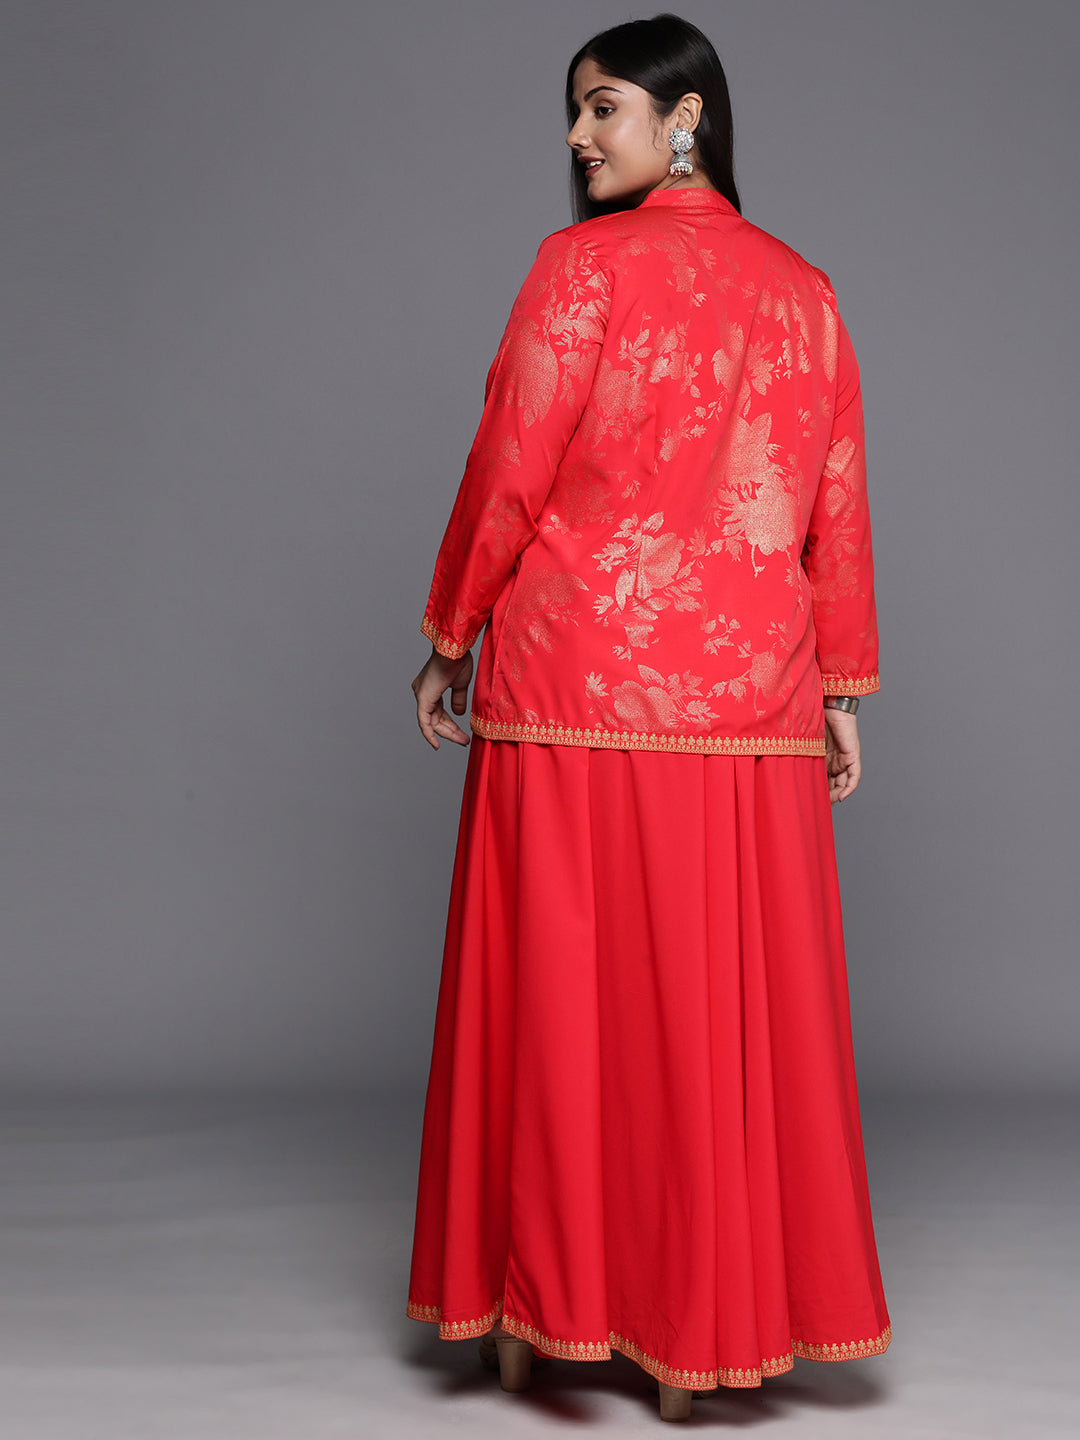 Red Plus Size Ethnic Top & Skirt with Shrug